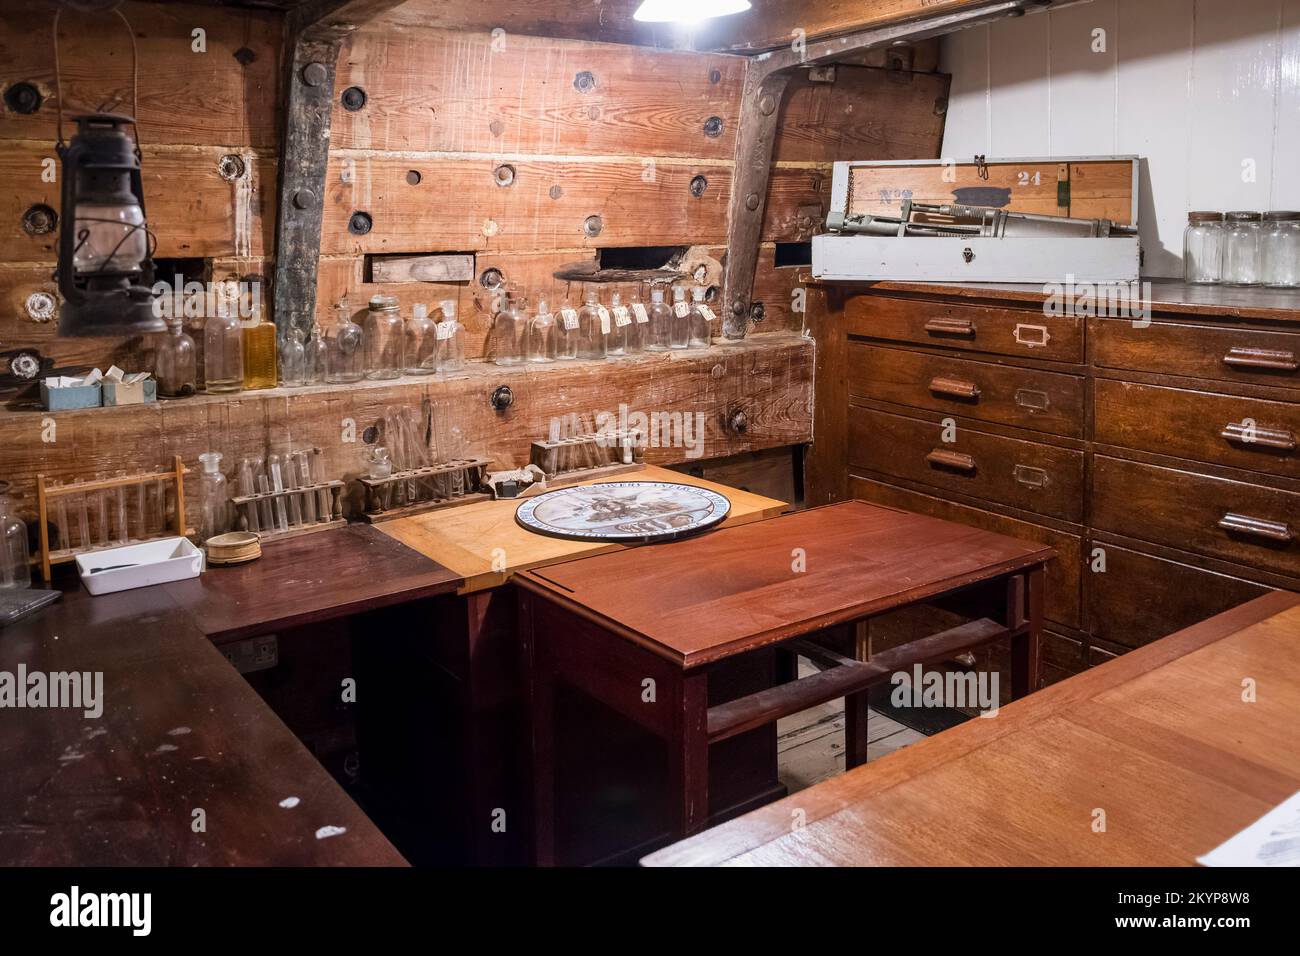 Photographer's darkroom on RSS Discovery, the ship in which Capt Scott travelled to the Antarctic. Now in dry dock in Dundee as a tourist attraction. Stock Photo